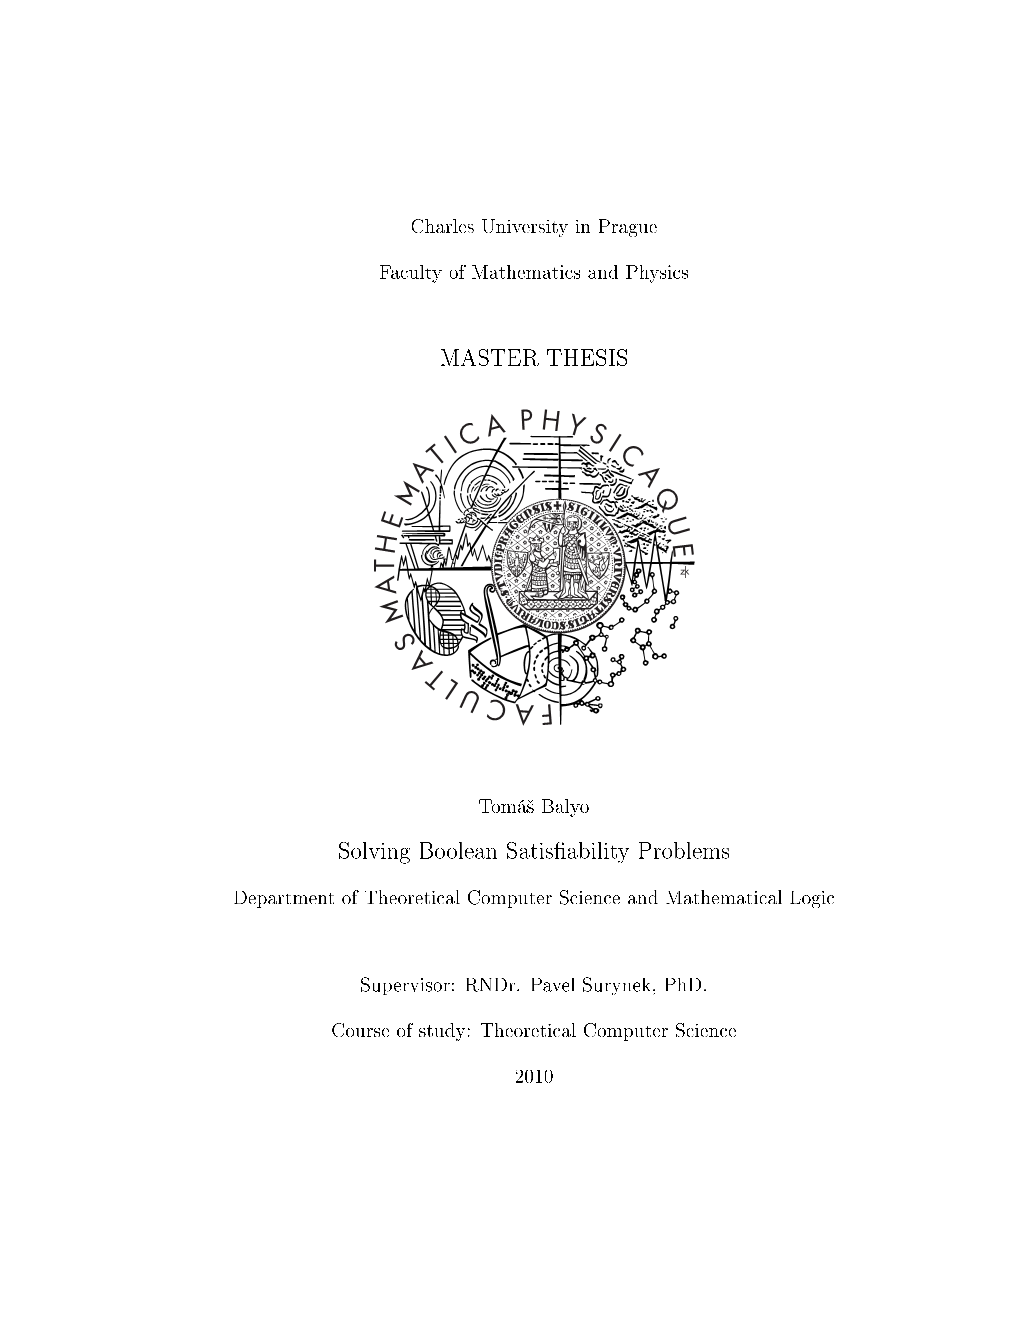 MASTER THESIS Solving Boolean Satisfiability Problems